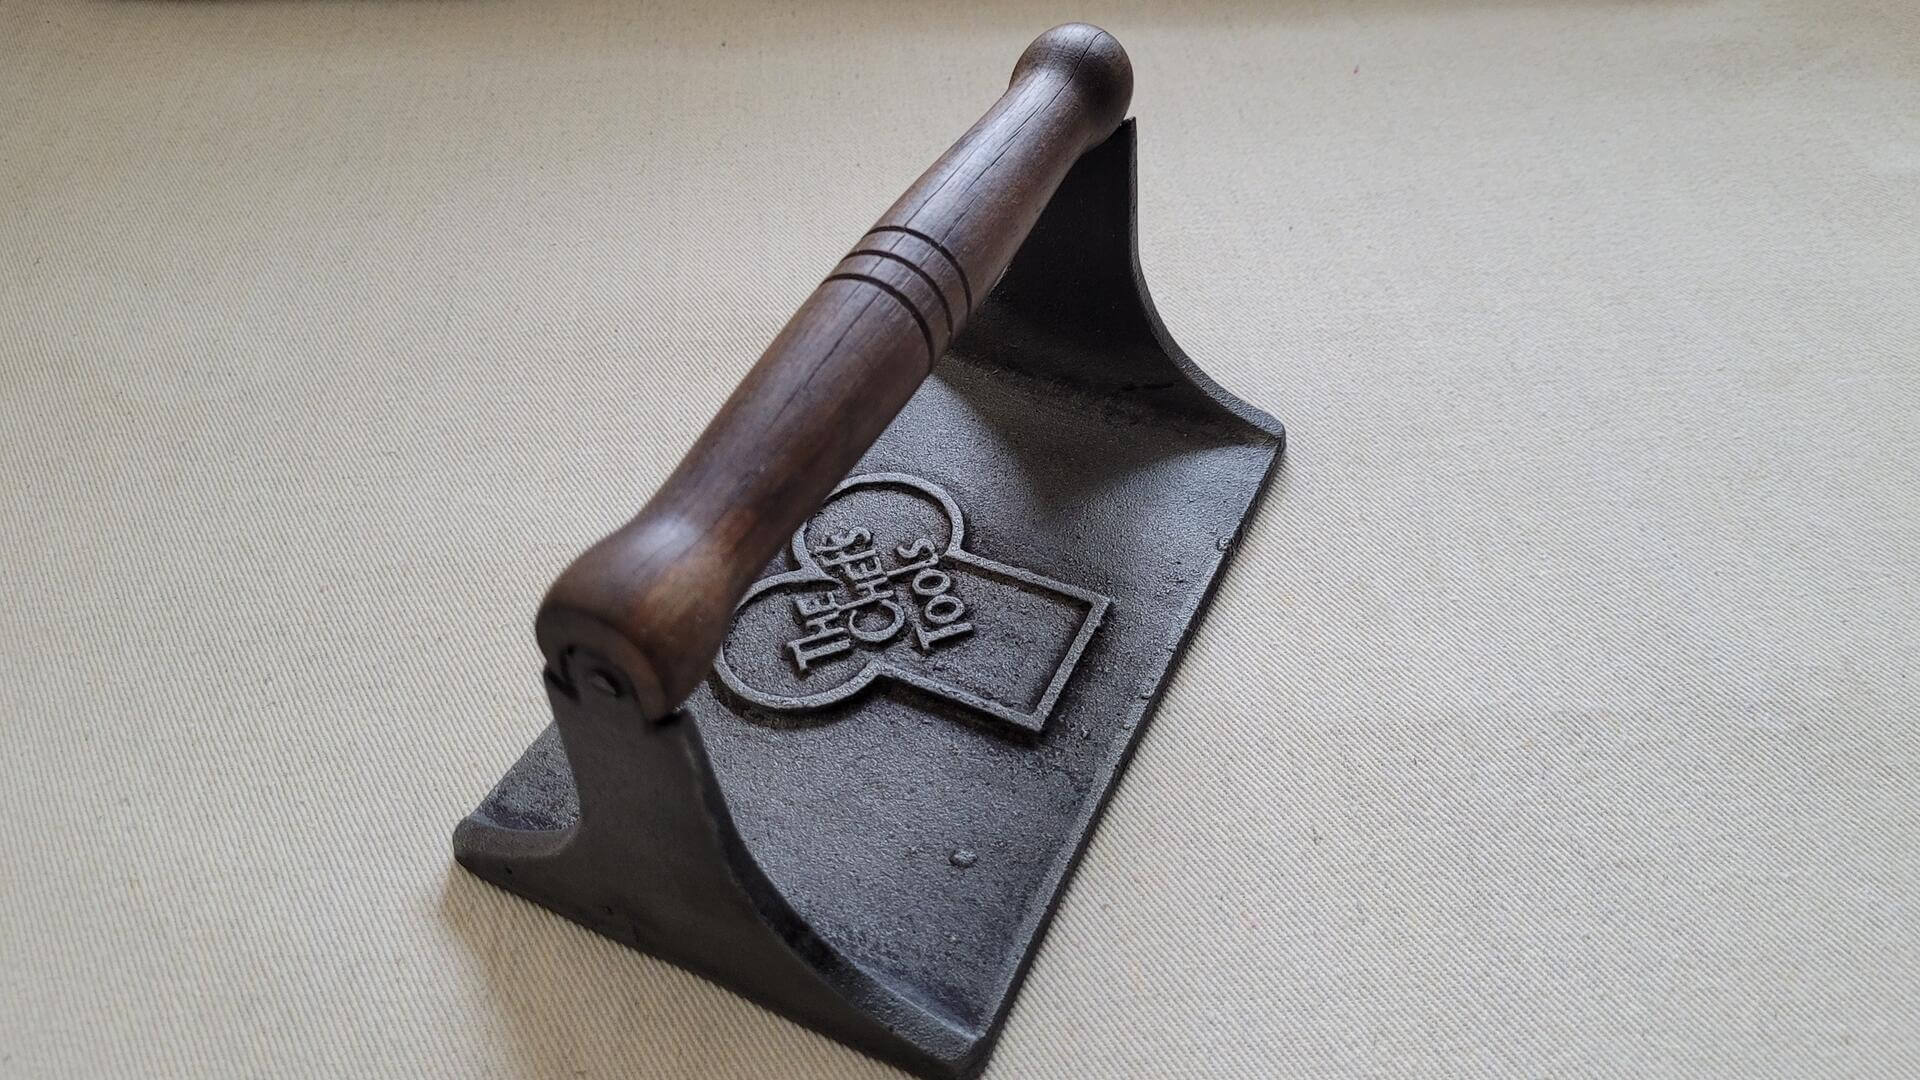 Vintage cast iron bacon press with wooden handle 4.5"x7" inches. Collectible rustic farmhouse kitchen tools featuring pig and vine design on the plate underside.